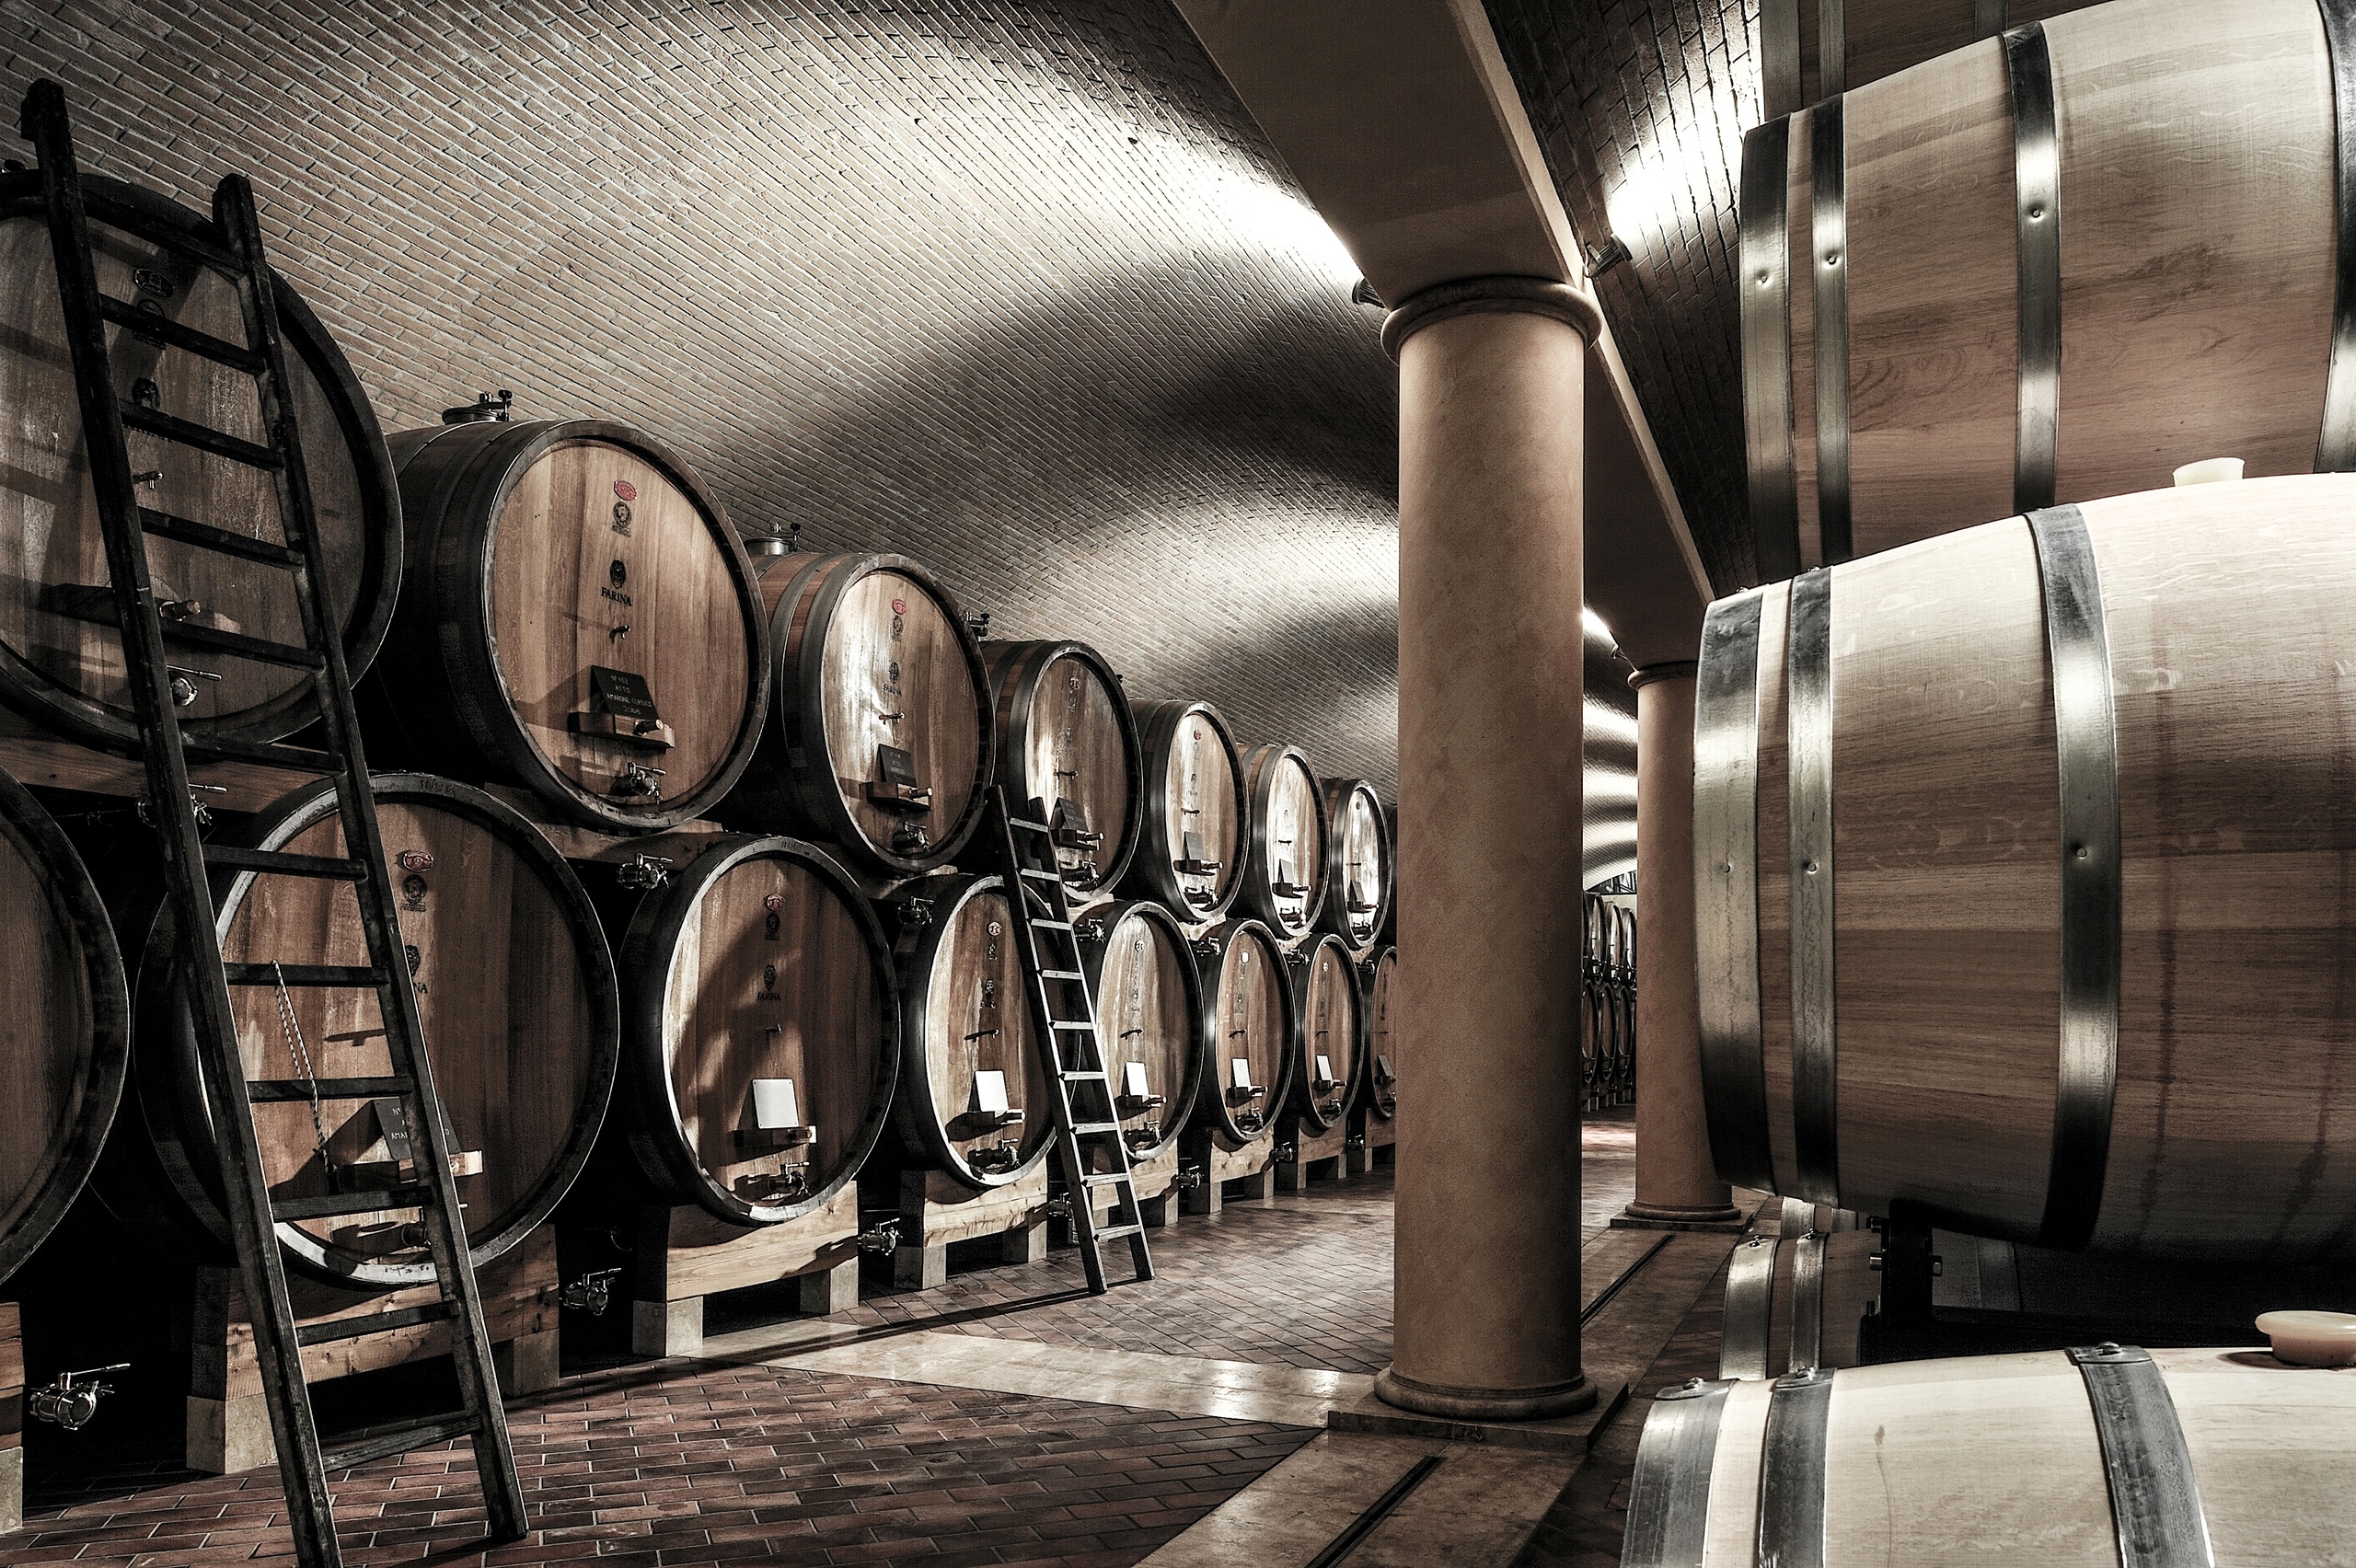 Valpolicella: Guided Tour and Tasting with Lunch in the Cellar in Small Group - Acomodações em Verona